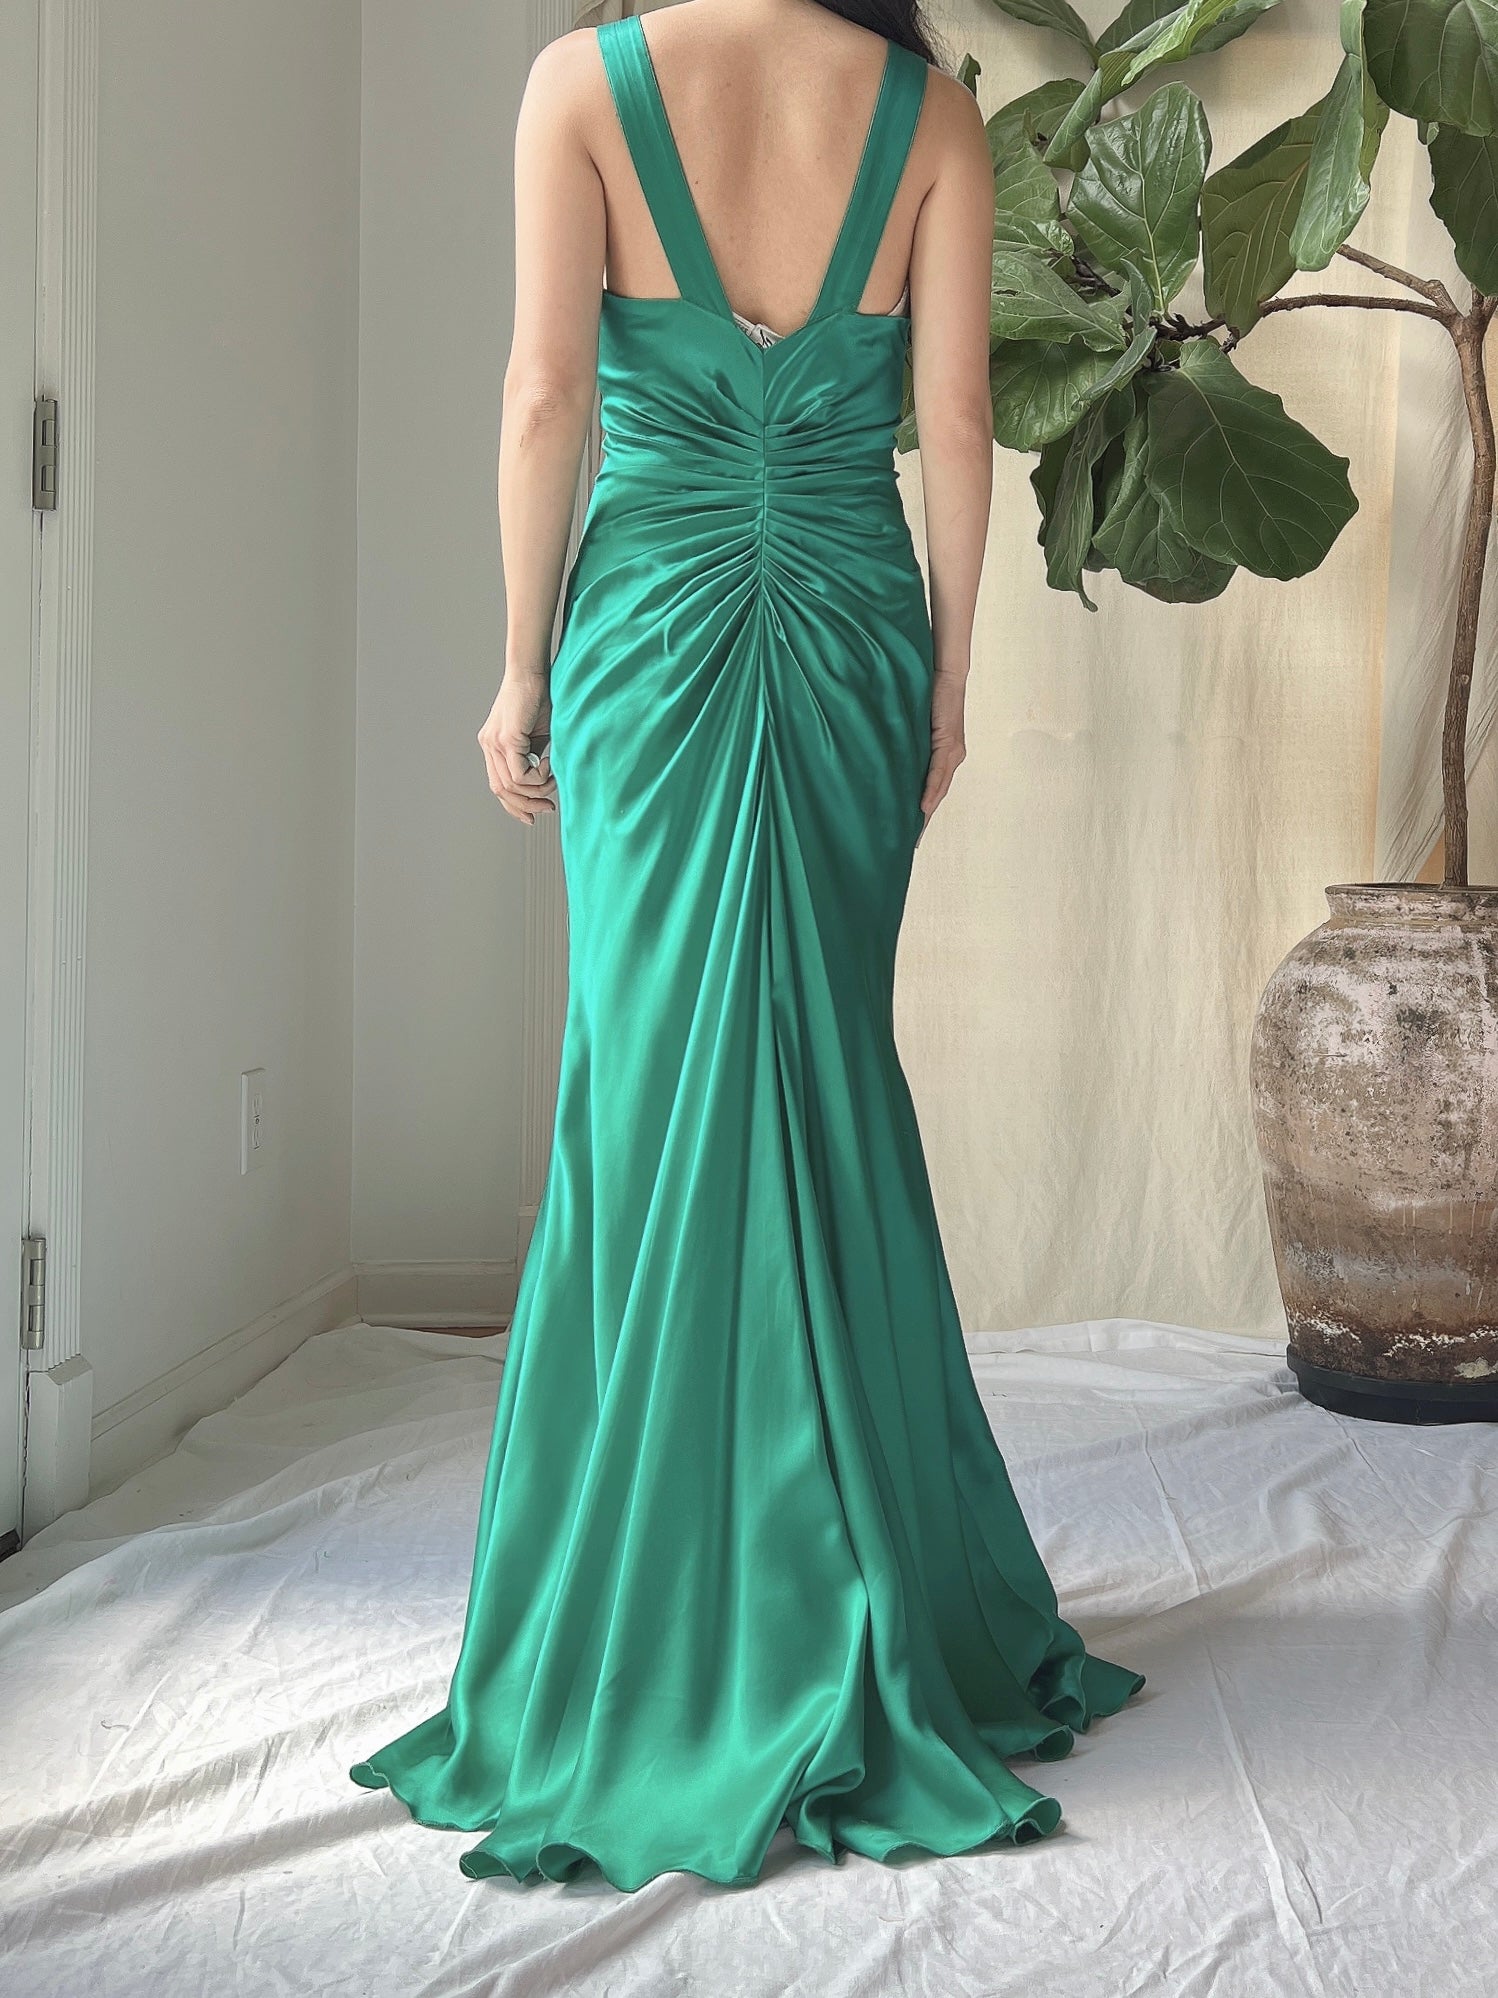 Y2K Emerald Silk Charmeuse Gown - XS/0-2